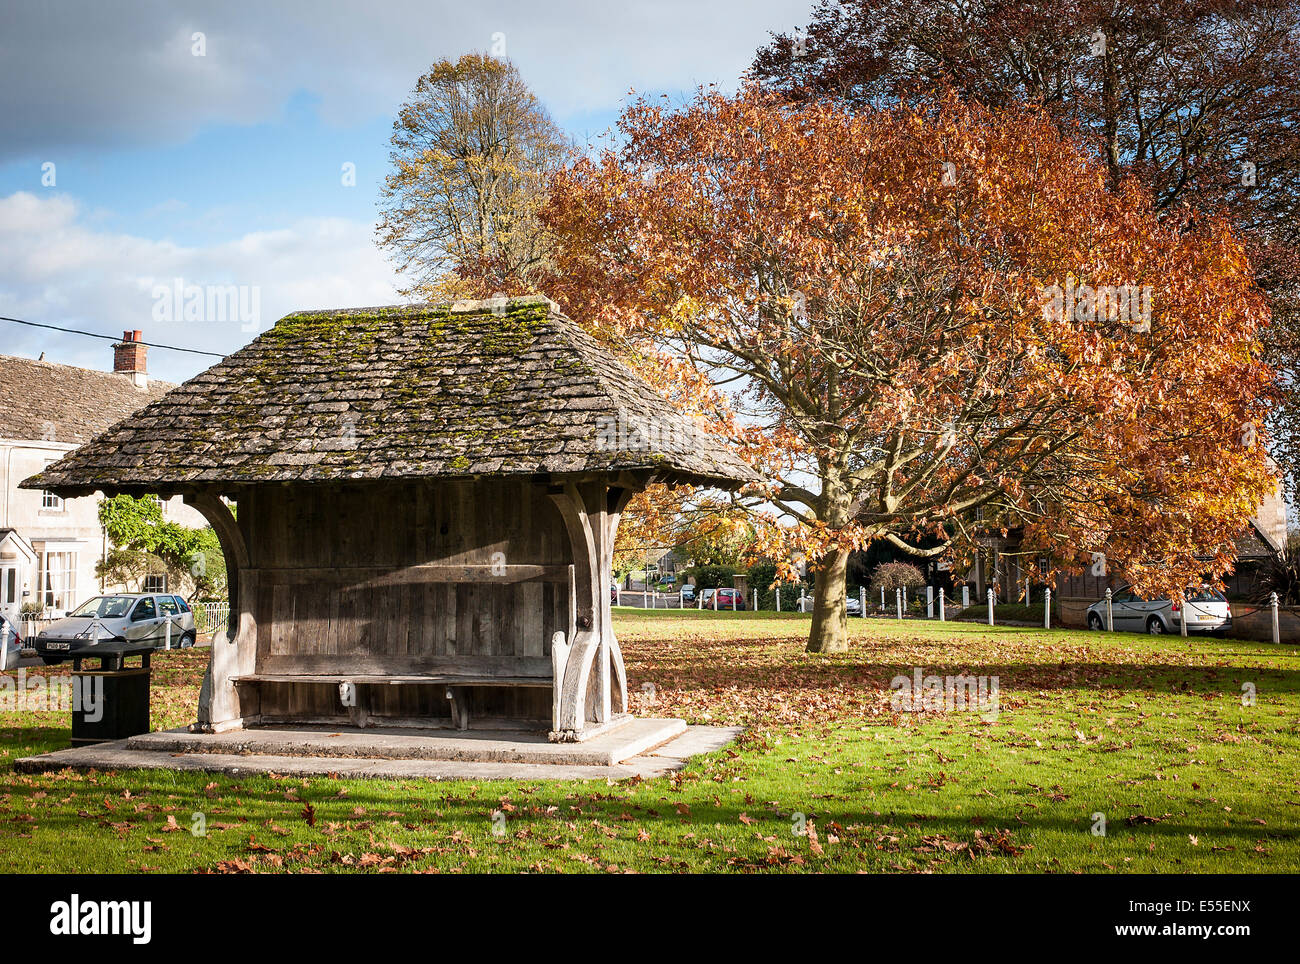 Shelter on the village green in Holt Wiltshire UK Stock Photo